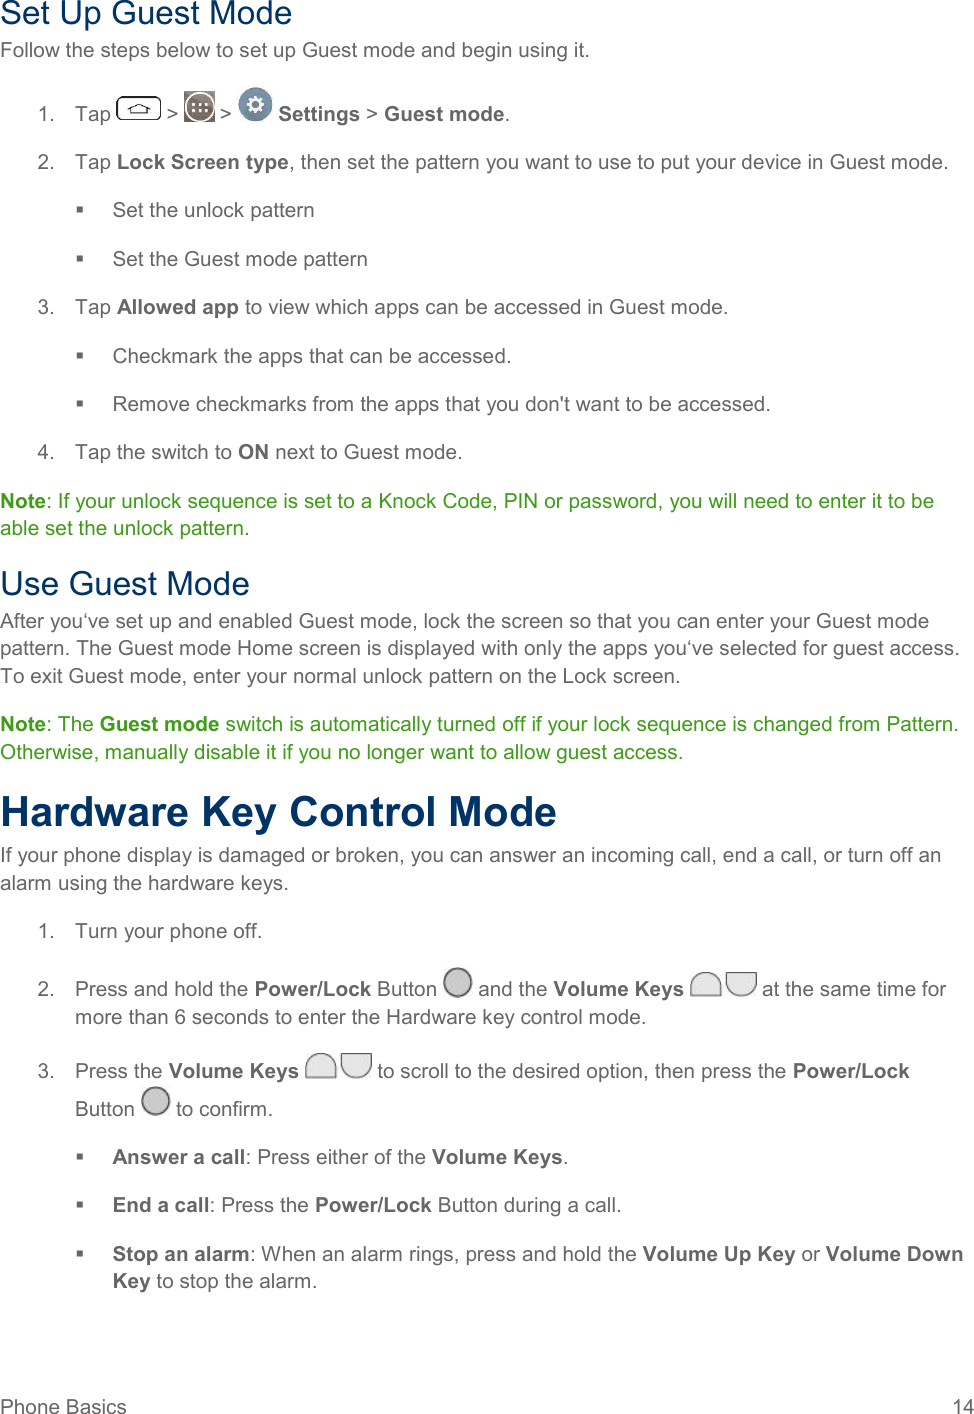 Phone Basics  14 Set Up Guest Mode Follow the steps below to set up Guest mode and begin using it. 1.  Tap   &gt;   &gt;   Settings &gt; Guest mode. 2.  Tap Lock Screen type, then set the pattern you want to use to put your device in Guest mode.   Set the unlock pattern   Set the Guest mode pattern 3.  Tap Allowed app to view which apps can be accessed in Guest mode.    Checkmark the apps that can be accessed.   Remove checkmarks from the apps that you don&apos;t want to be accessed. 4.  Tap the switch to ON next to Guest mode. Note: If your unlock sequence is set to a Knock Code, PIN or password, you will need to enter it to be able set the unlock pattern. Use Guest Mode After you‘ve set up and enabled Guest mode, lock the screen so that you can enter your Guest mode pattern. The Guest mode Home screen is displayed with only the apps you‘ve selected for guest access. To exit Guest mode, enter your normal unlock pattern on the Lock screen. Note: The Guest mode switch is automatically turned off if your lock sequence is changed from Pattern. Otherwise, manually disable it if you no longer want to allow guest access. Hardware Key Control Mode If your phone display is damaged or broken, you can answer an incoming call, end a call, or turn off an alarm using the hardware keys. 1.  Turn your phone off. 2.  Press and hold the Power/Lock Button   and the Volume Keys   at the same time for more than 6 seconds to enter the Hardware key control mode. 3.  Press the Volume Keys   to scroll to the desired option, then press the Power/Lock Button   to confirm.  Answer a call: Press either of the Volume Keys.  End a call: Press the Power/Lock Button during a call.  Stop an alarm: When an alarm rings, press and hold the Volume Up Key or Volume Down Key to stop the alarm. 